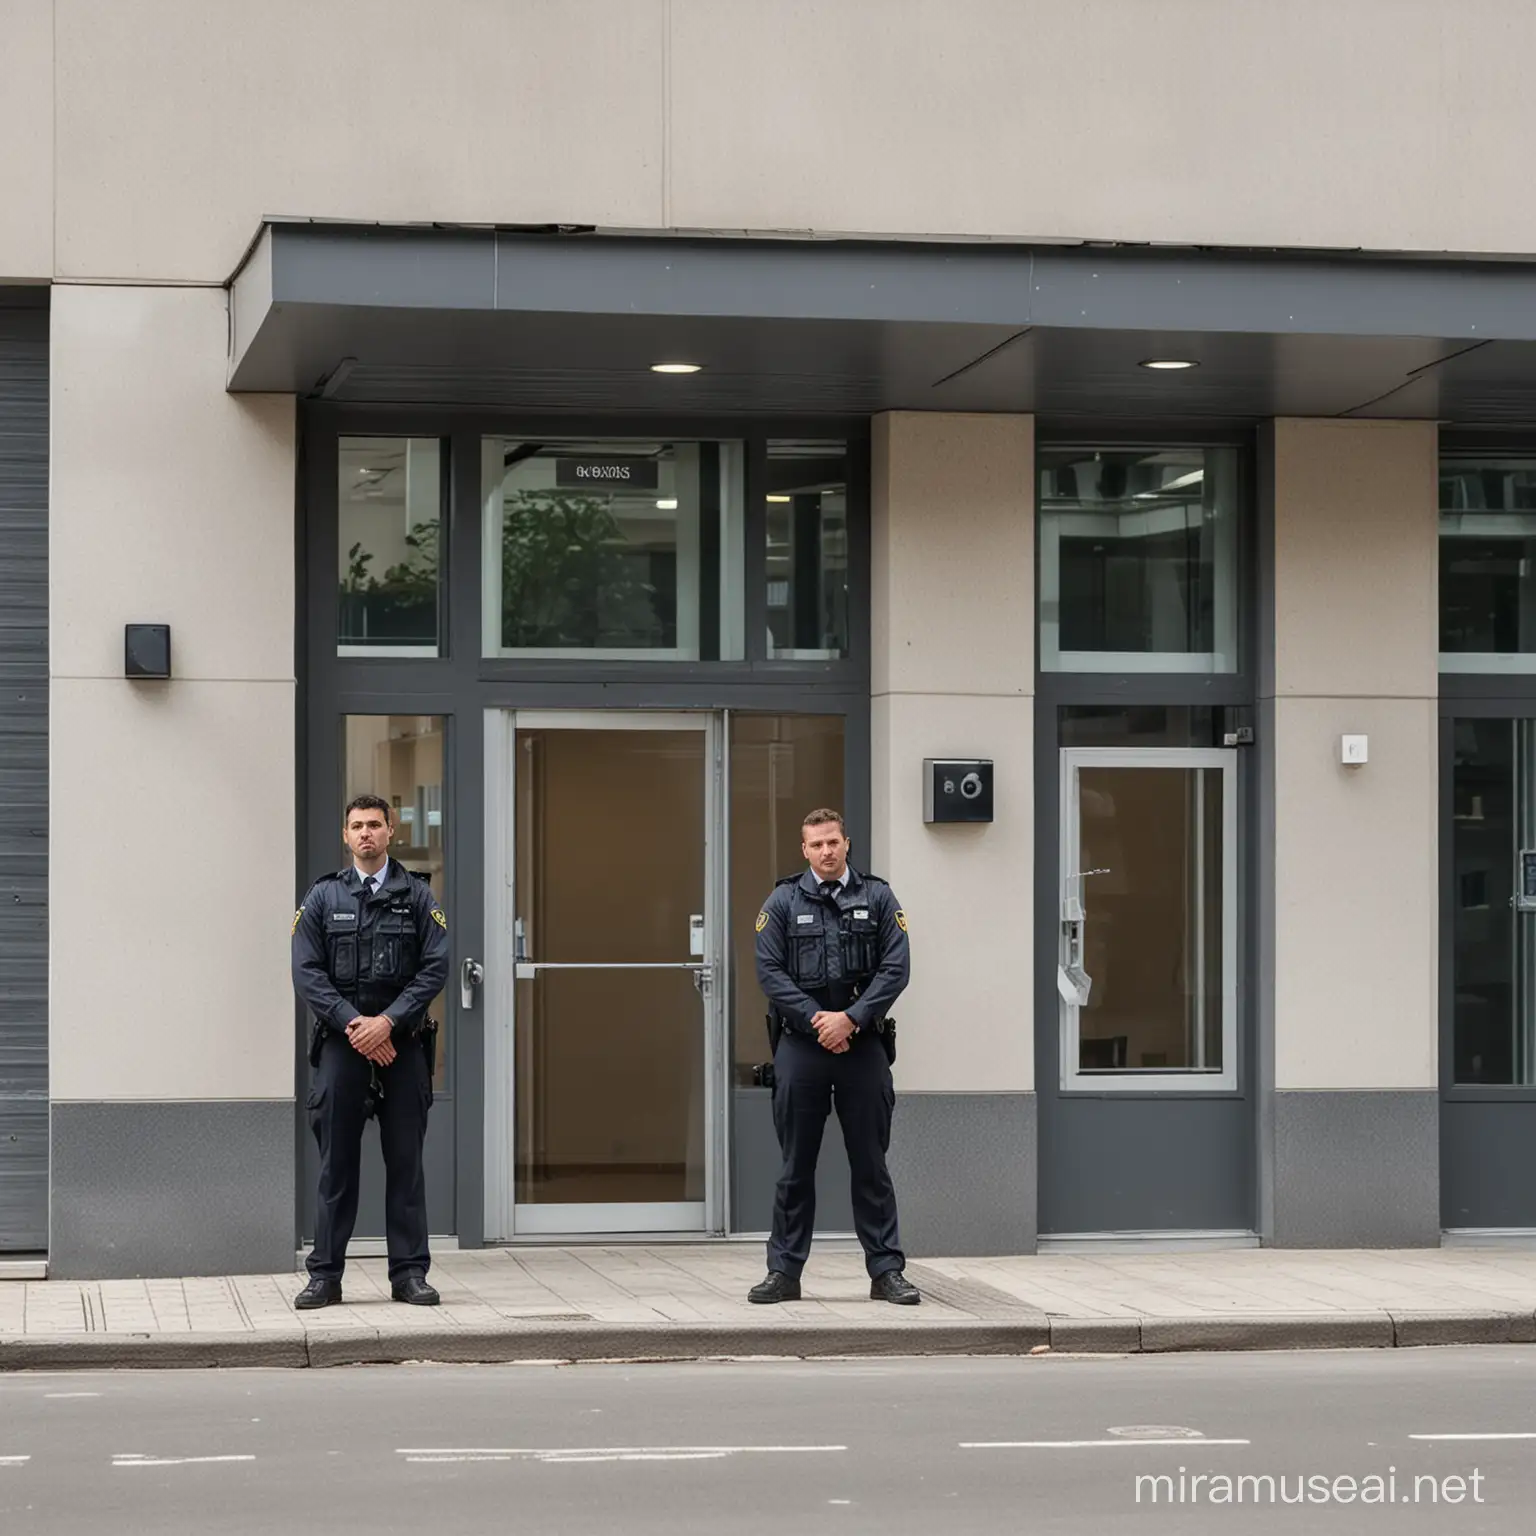 a small office building secured with security guards outside